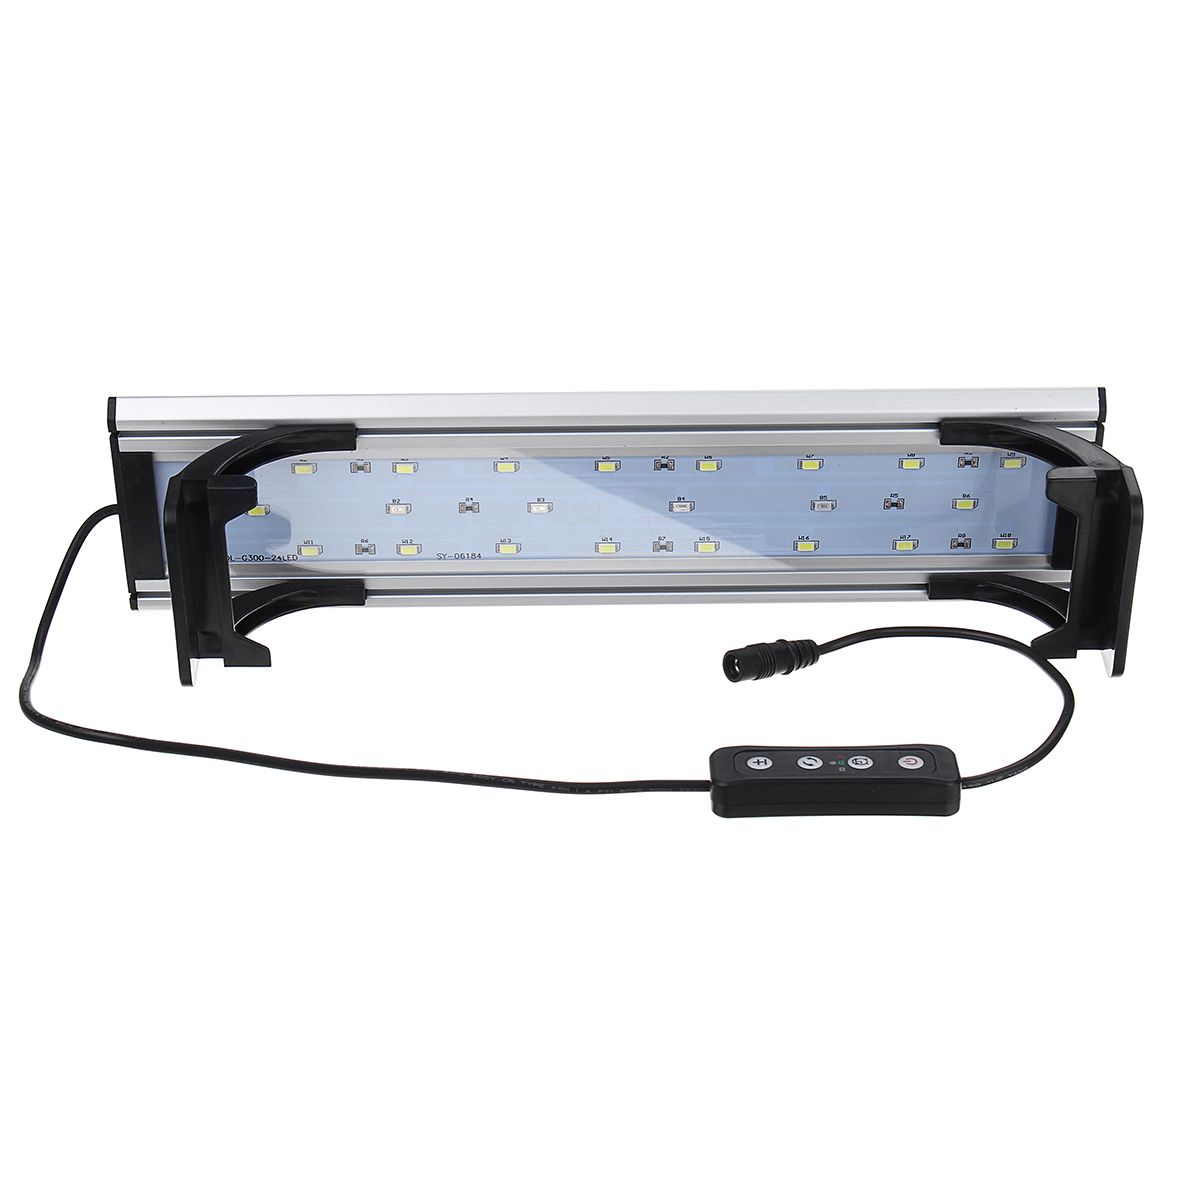 Dimmable--Timer-LED-Fish-Tank-Light-Lamp-Hood-Aquarium-Lighting-with-Extendable-Brackets-for-30CM-Ta-1639937